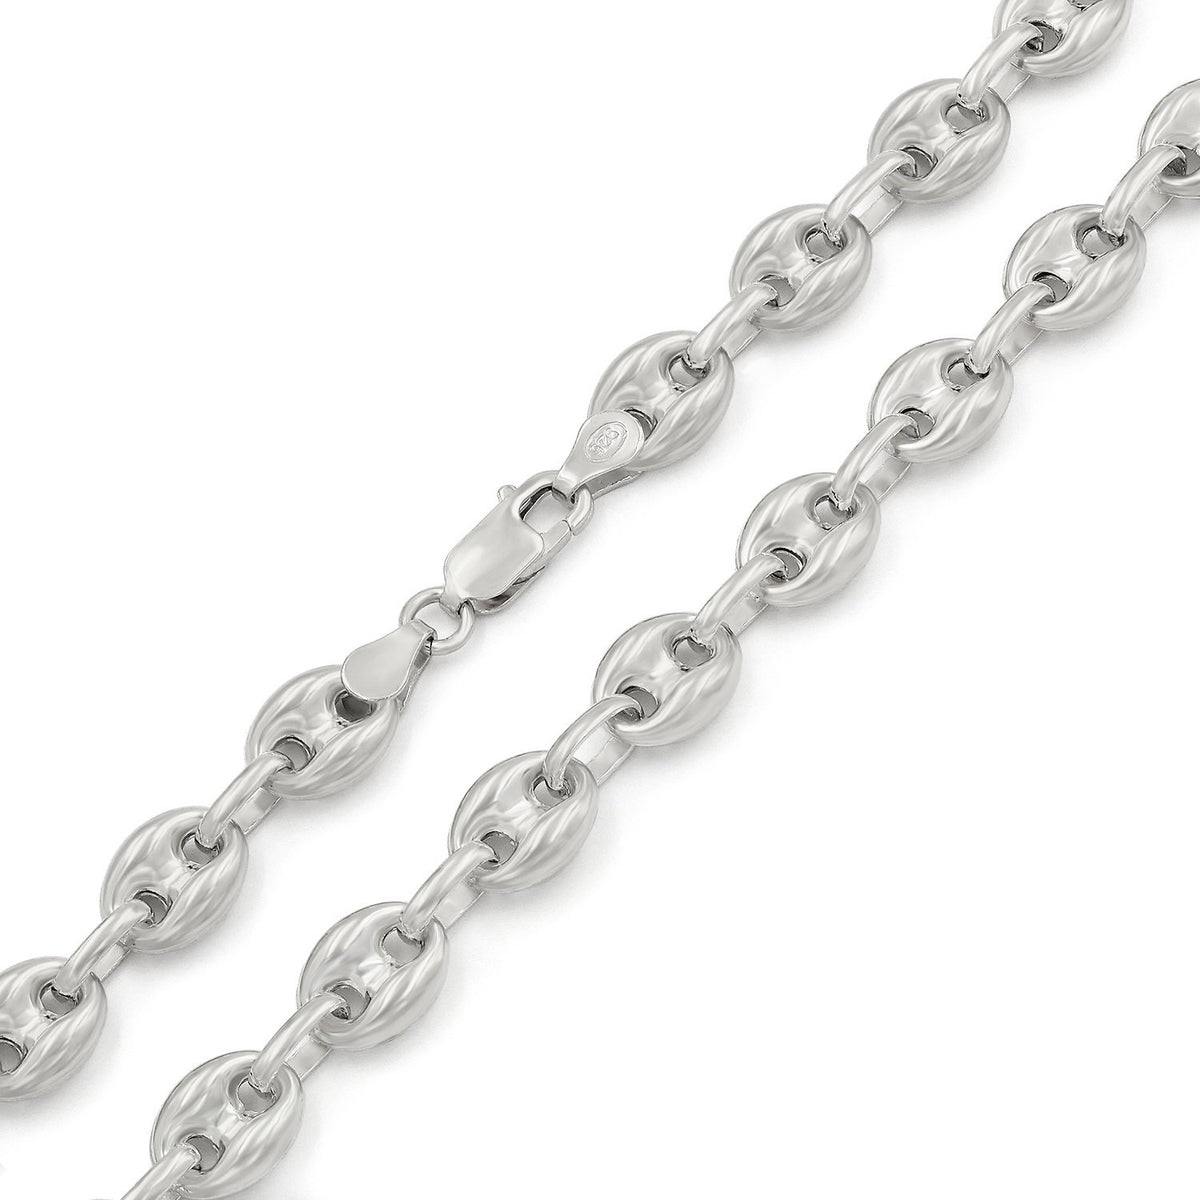 925 Sterling Silver 9mm Puff Mariner Hollow Rhodium Plated Chain